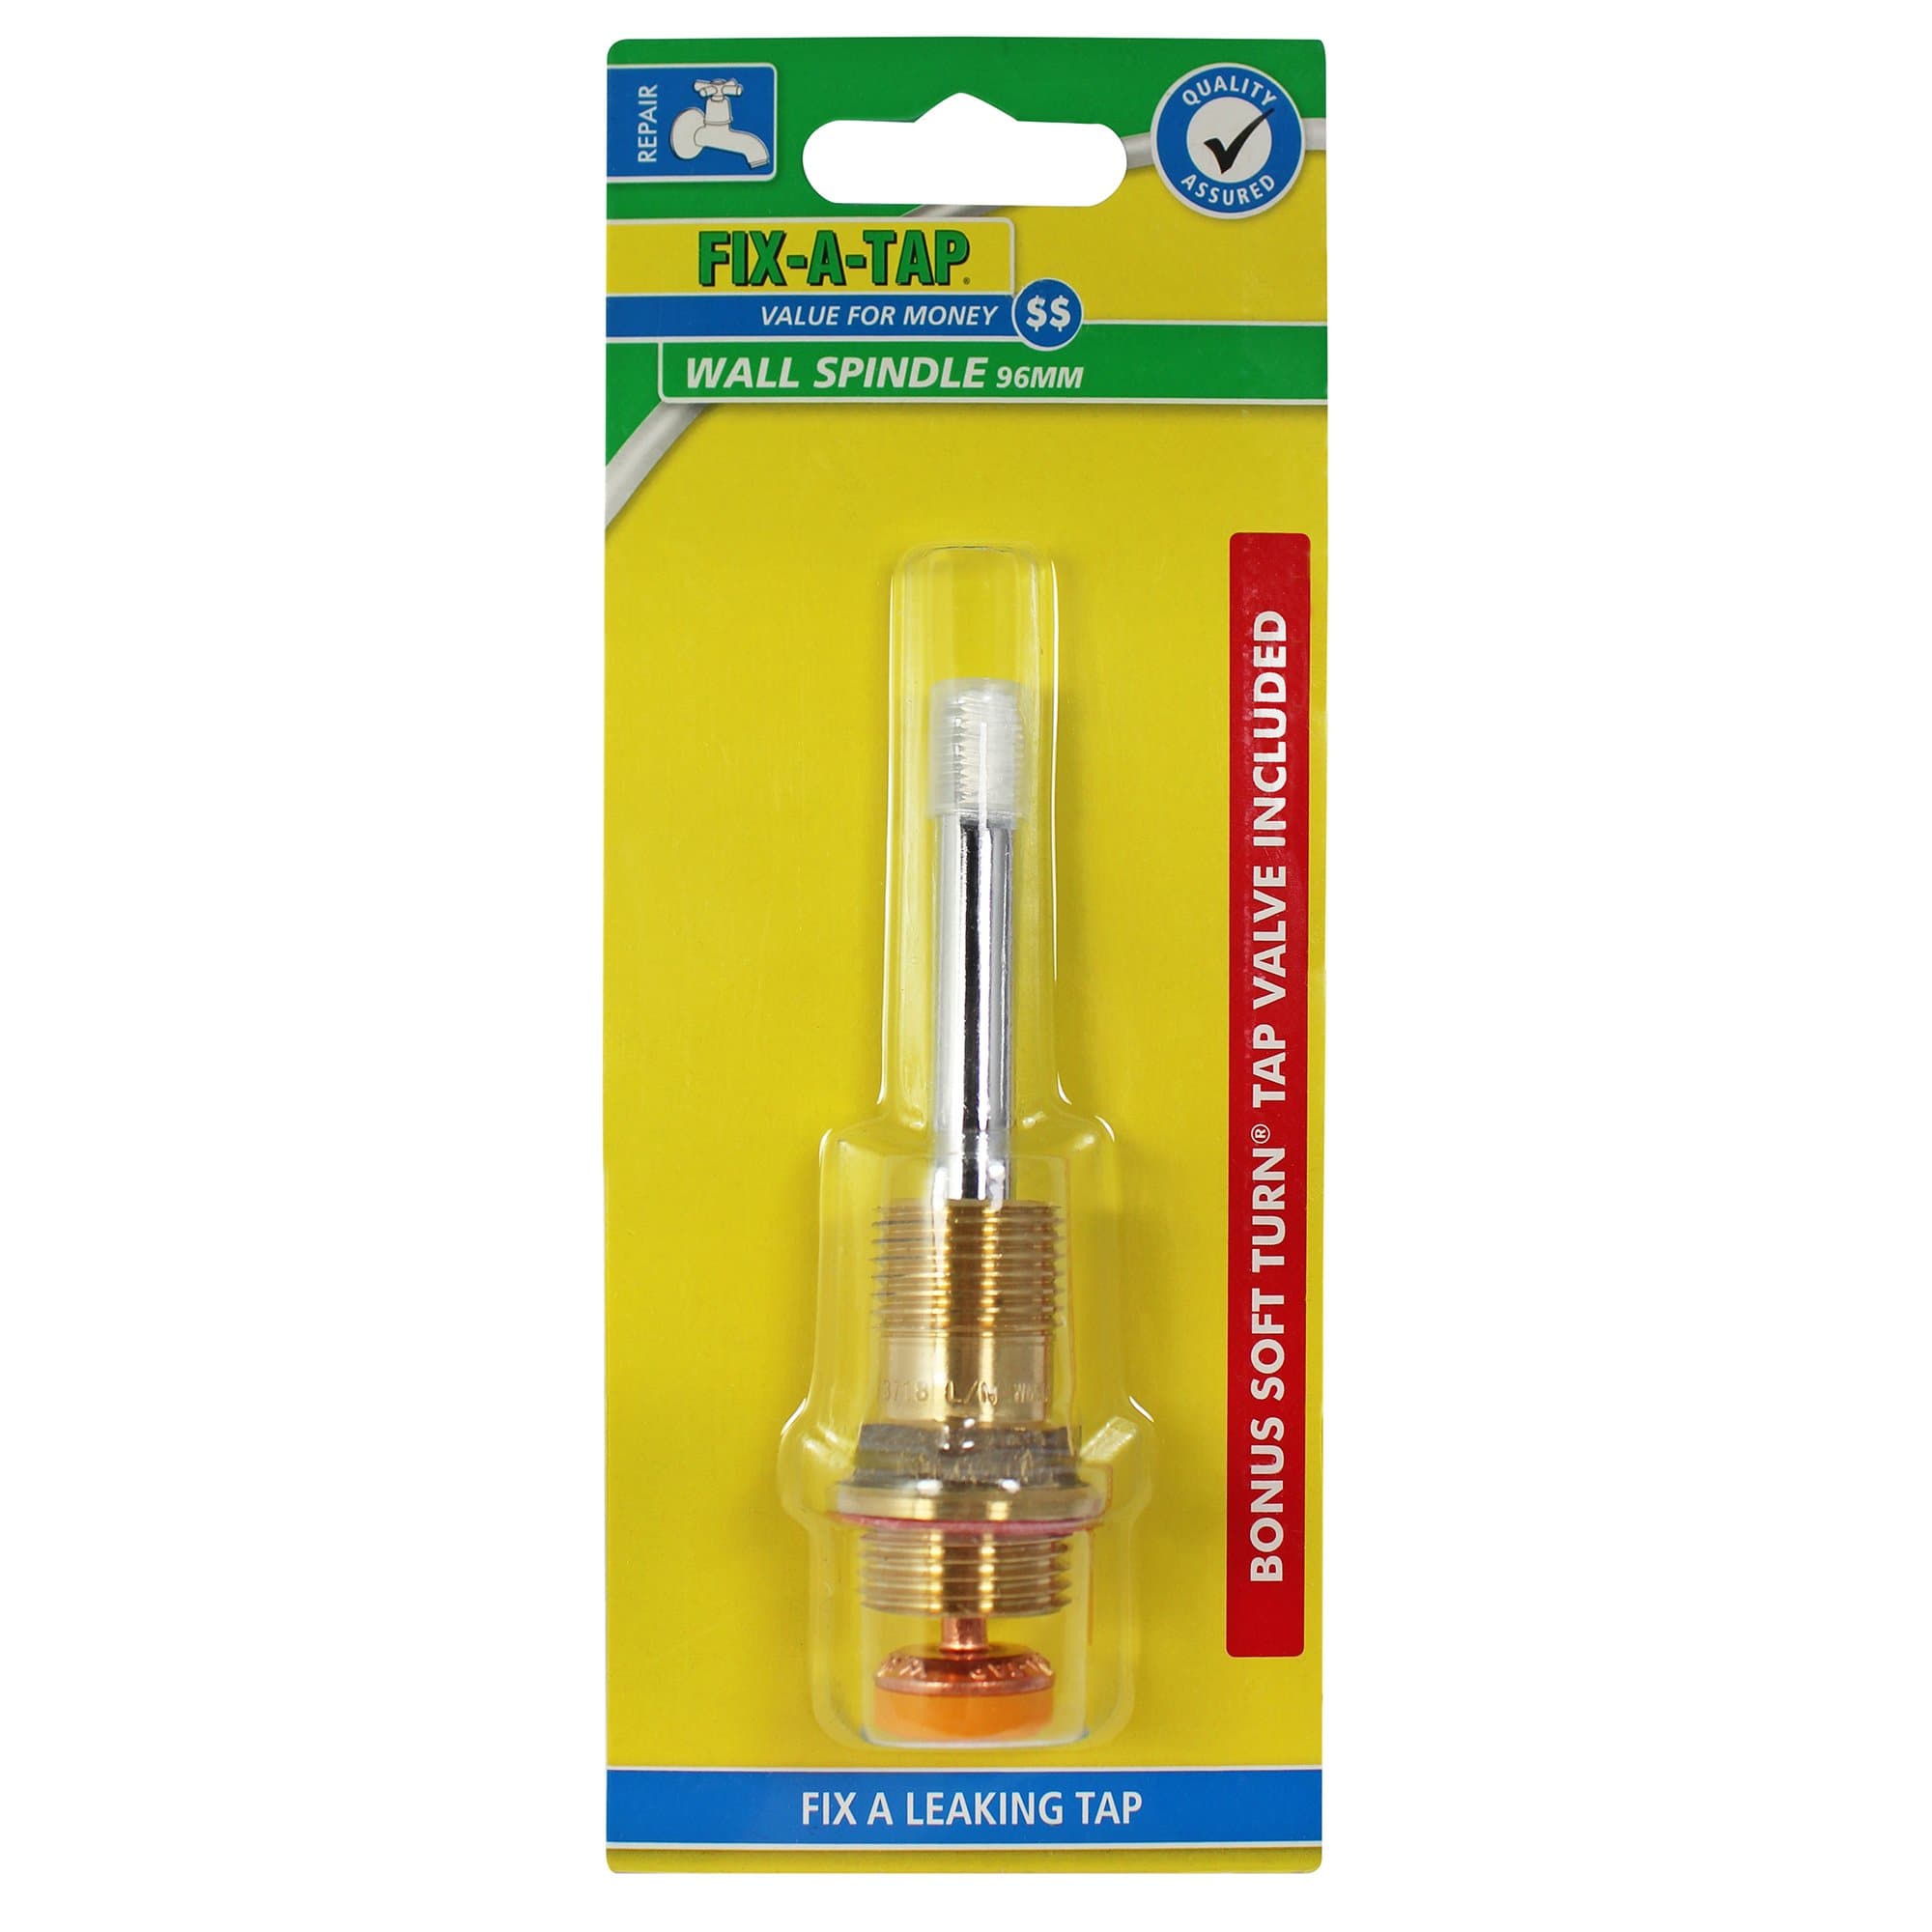 FIX-A-TAP Wall Spindle 96mm 240439 - Double Bay Hardware